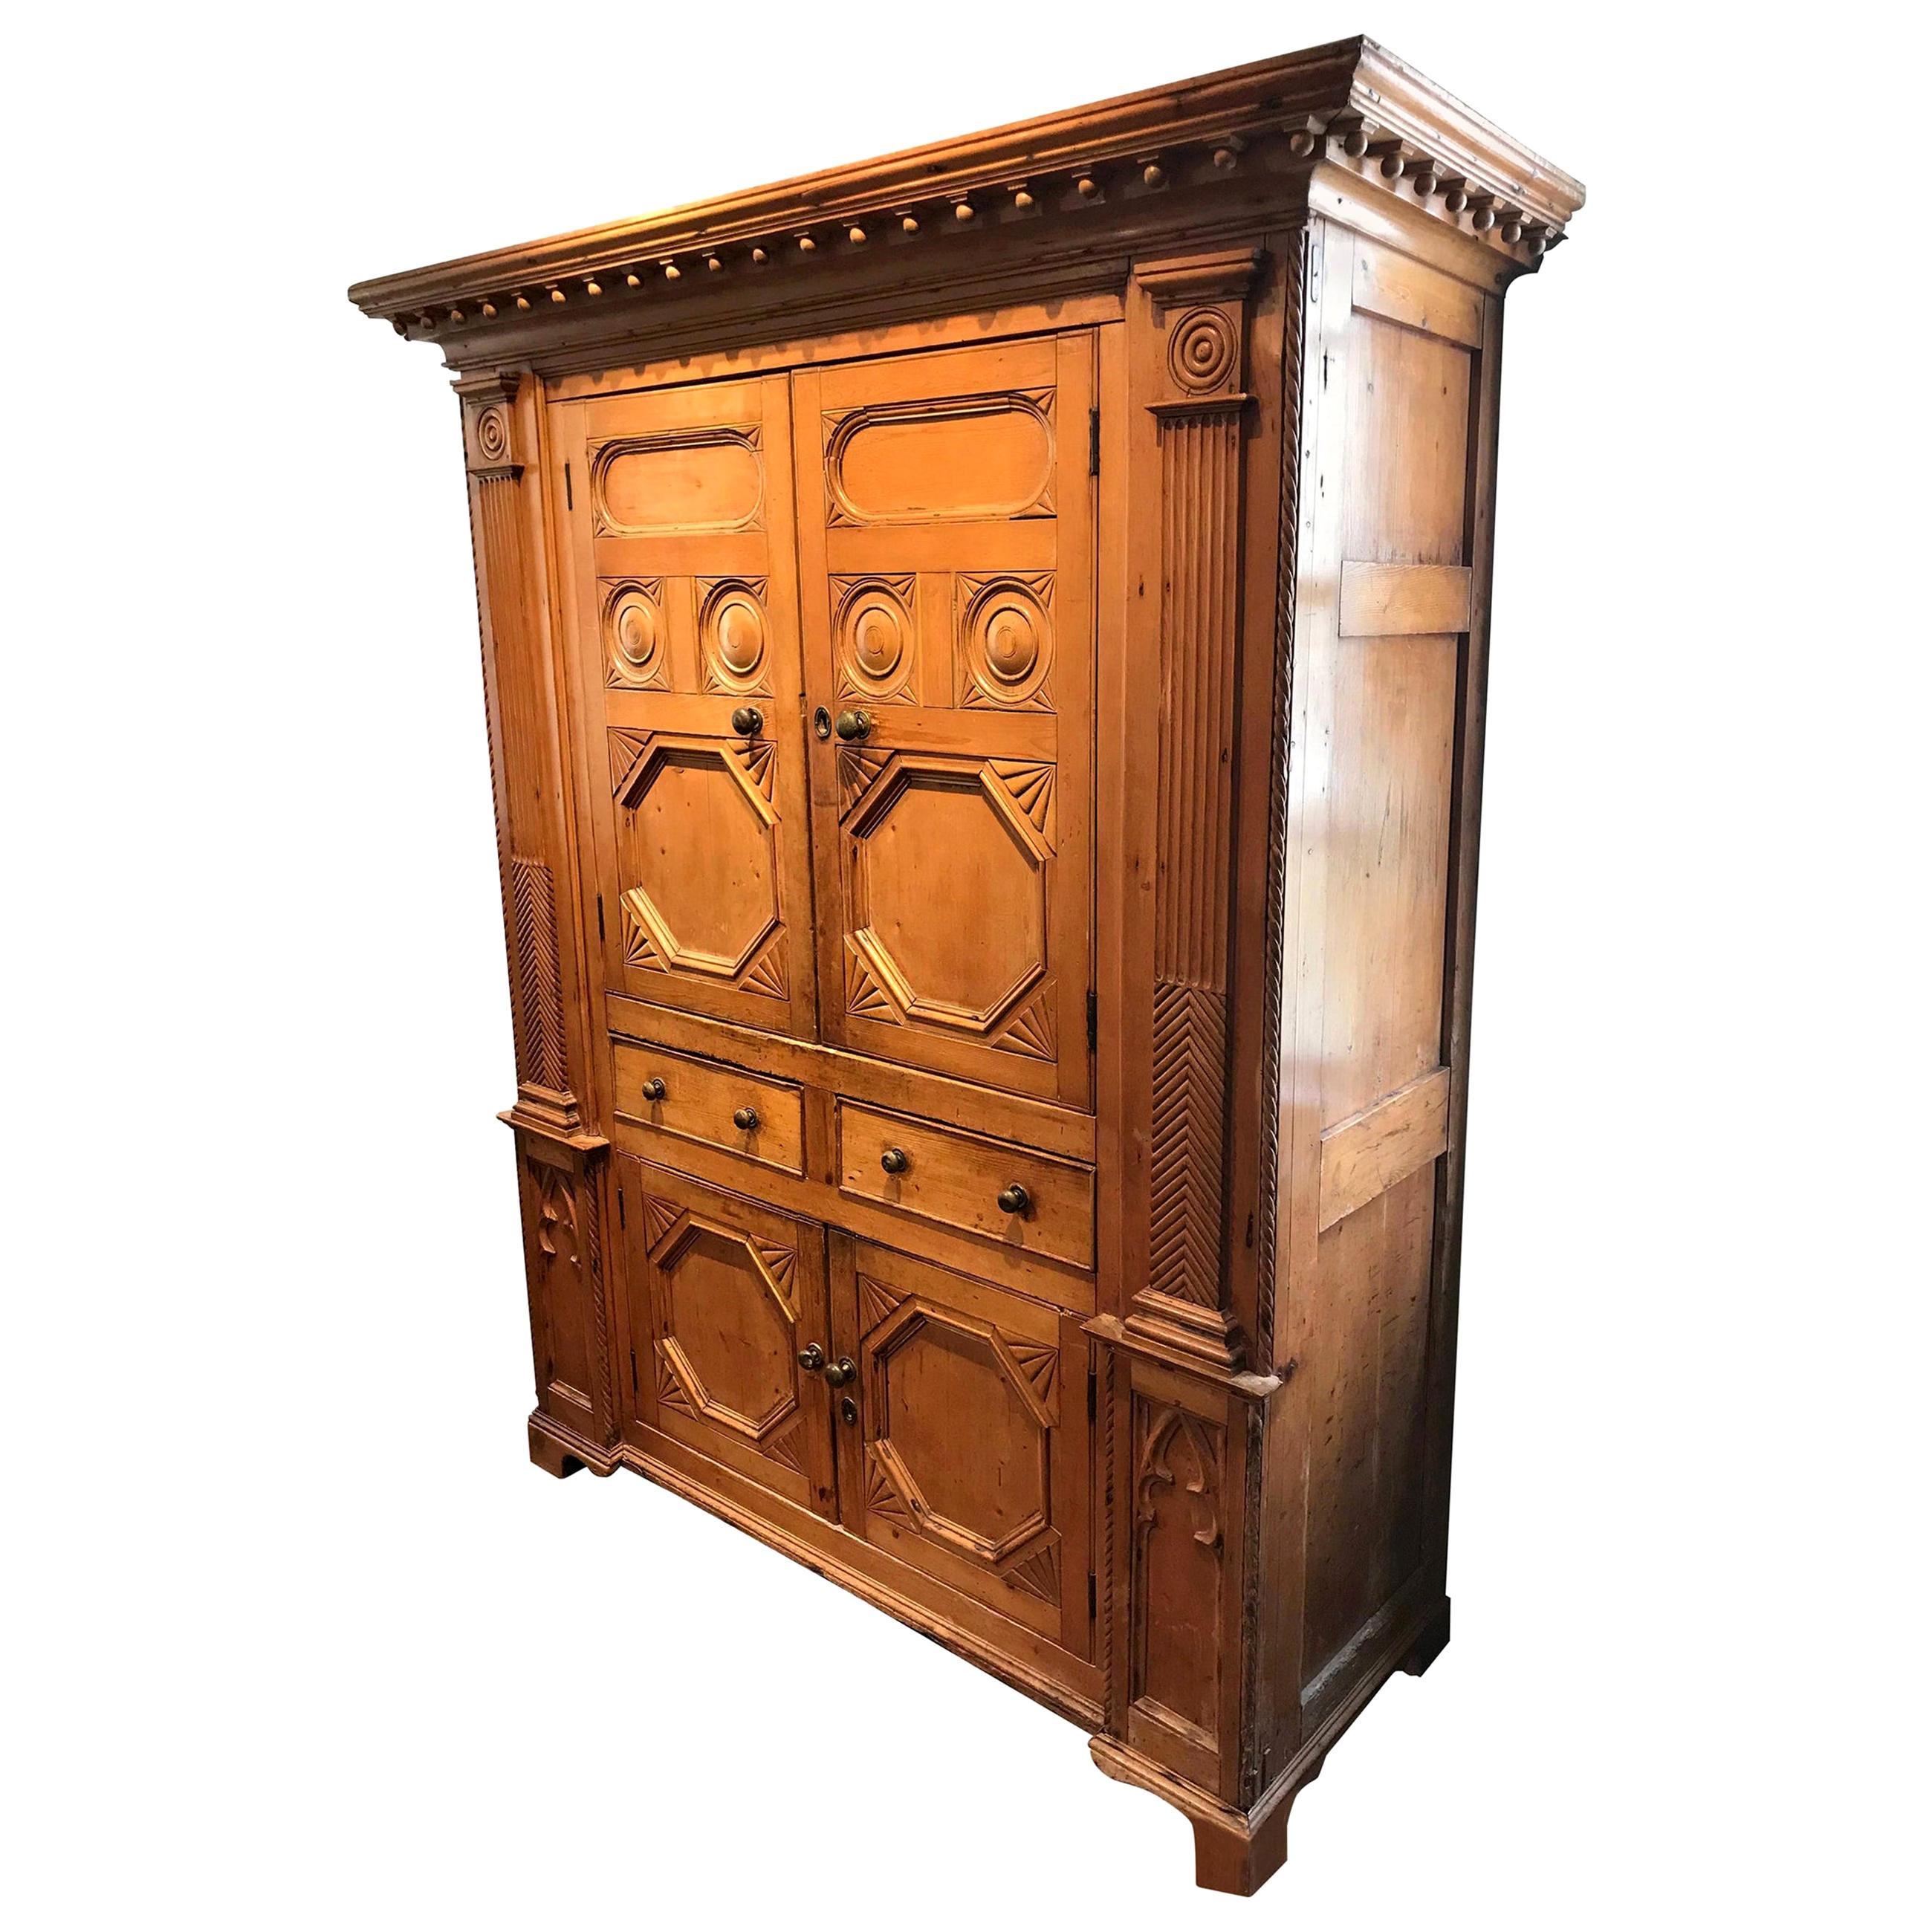 19th Century Neoclassical Revival Irish Pine Cabinet with Molded Decorations